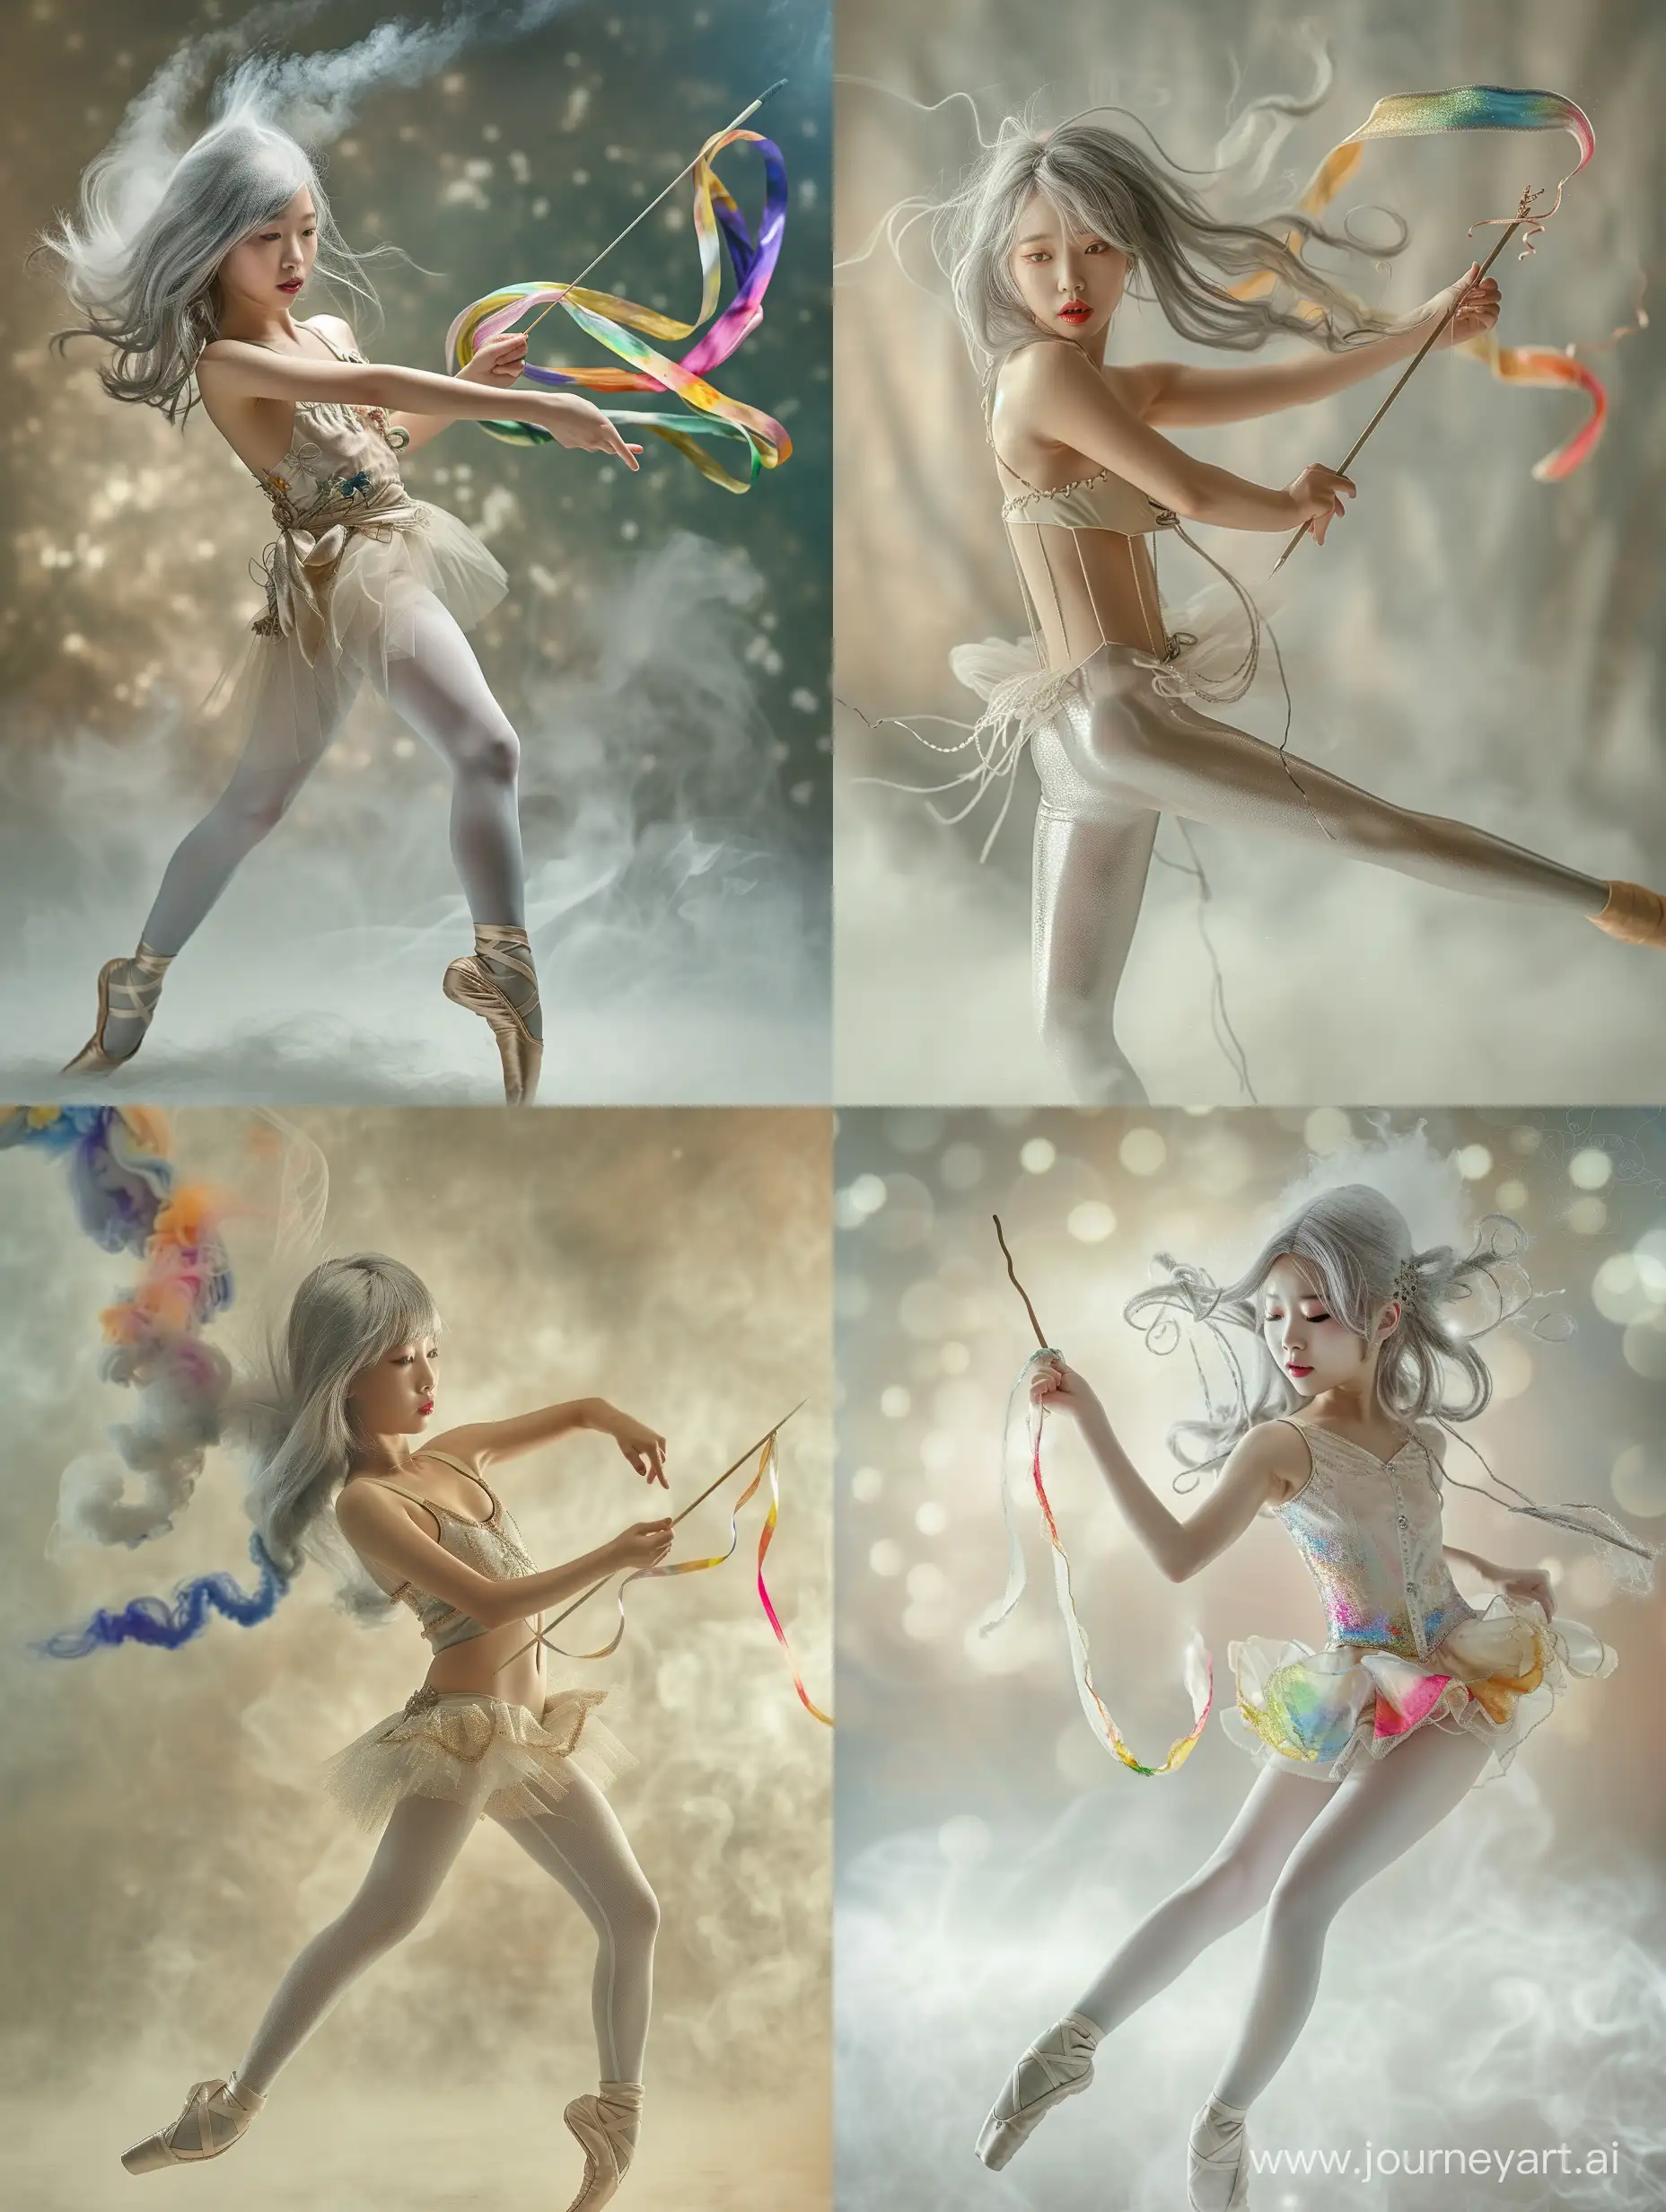 reality of a modern silk dancing Asian girl, 20 years old, silver gray hair formed from smoke, holding a small stick connected to a silk ribbon, a silk ribbon formed from colorful paint in a surrealist style, she wearing a ballet-style outfit, shiny white tights, she is dancing on tiptoes, cold background, blurred background, smoky, soft, studio lighting